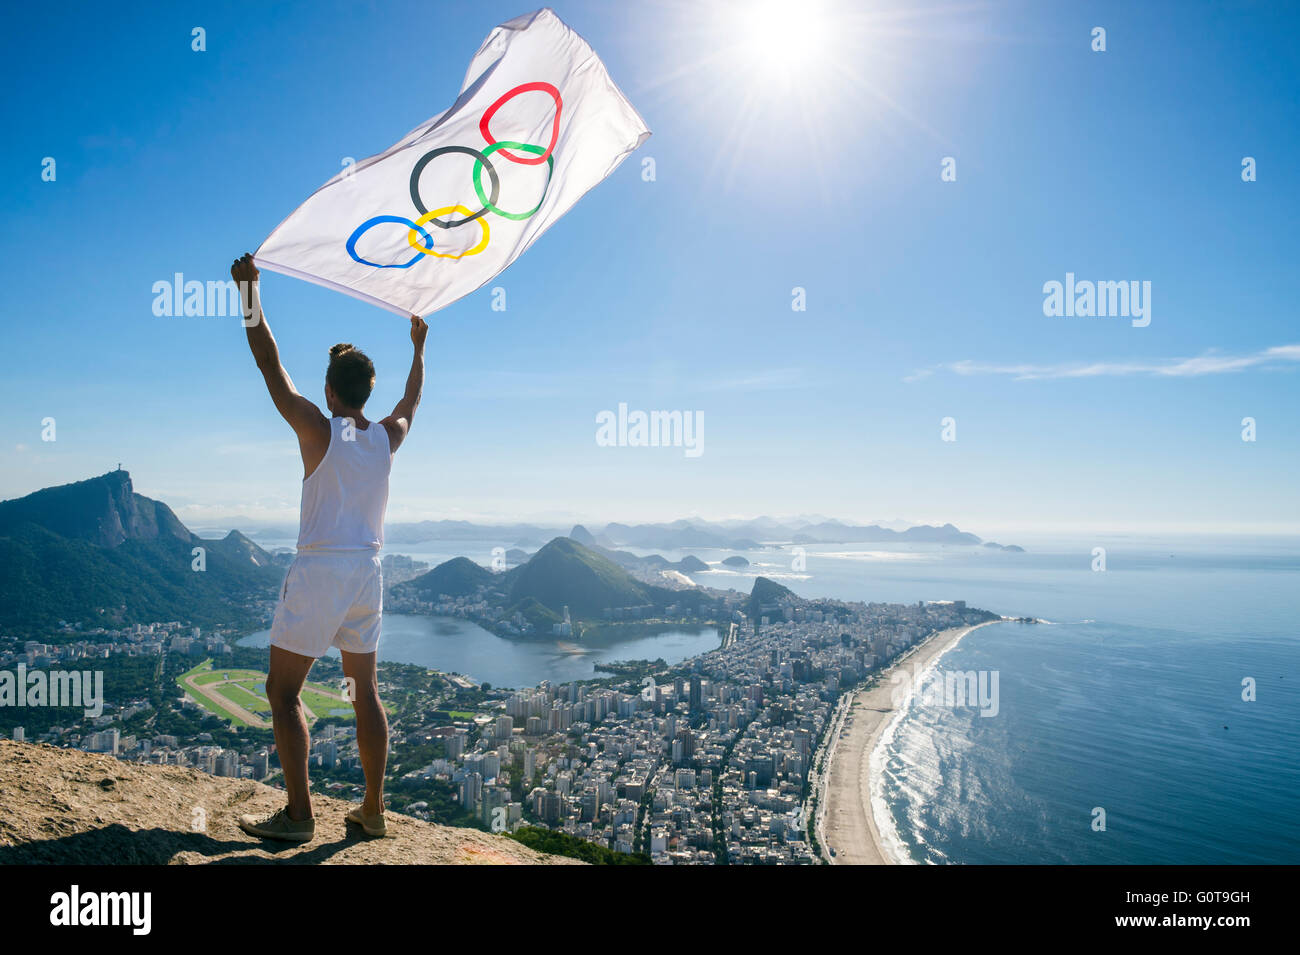 RIO DE JANEIRO - MARCH 21, 2016: Athlete stands holding Olympic flag above a city skyline view of the beaches and Corcovado. Stock Photo